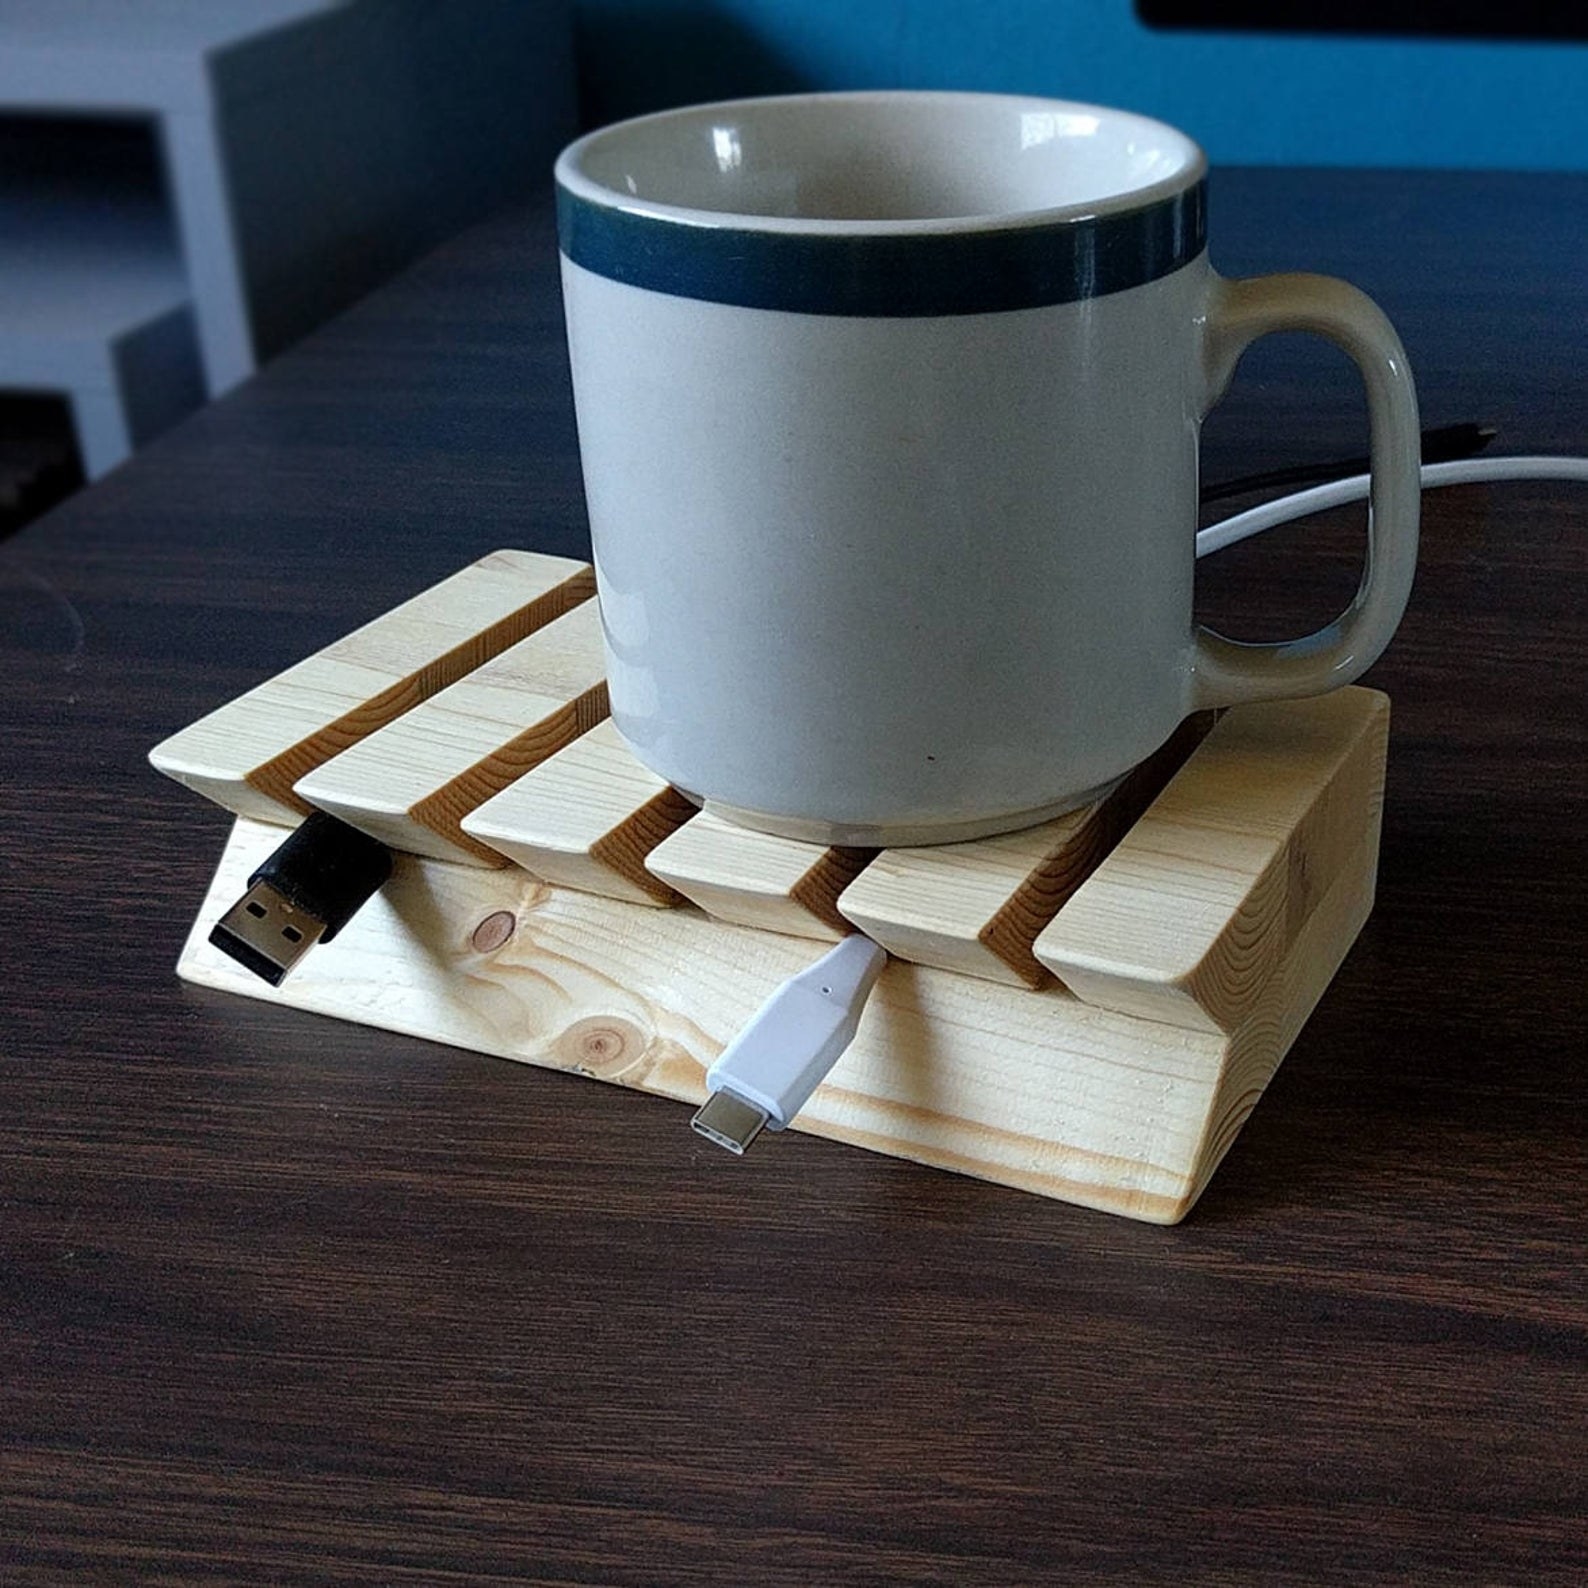 wooden cord organizer propping up phone charger cords